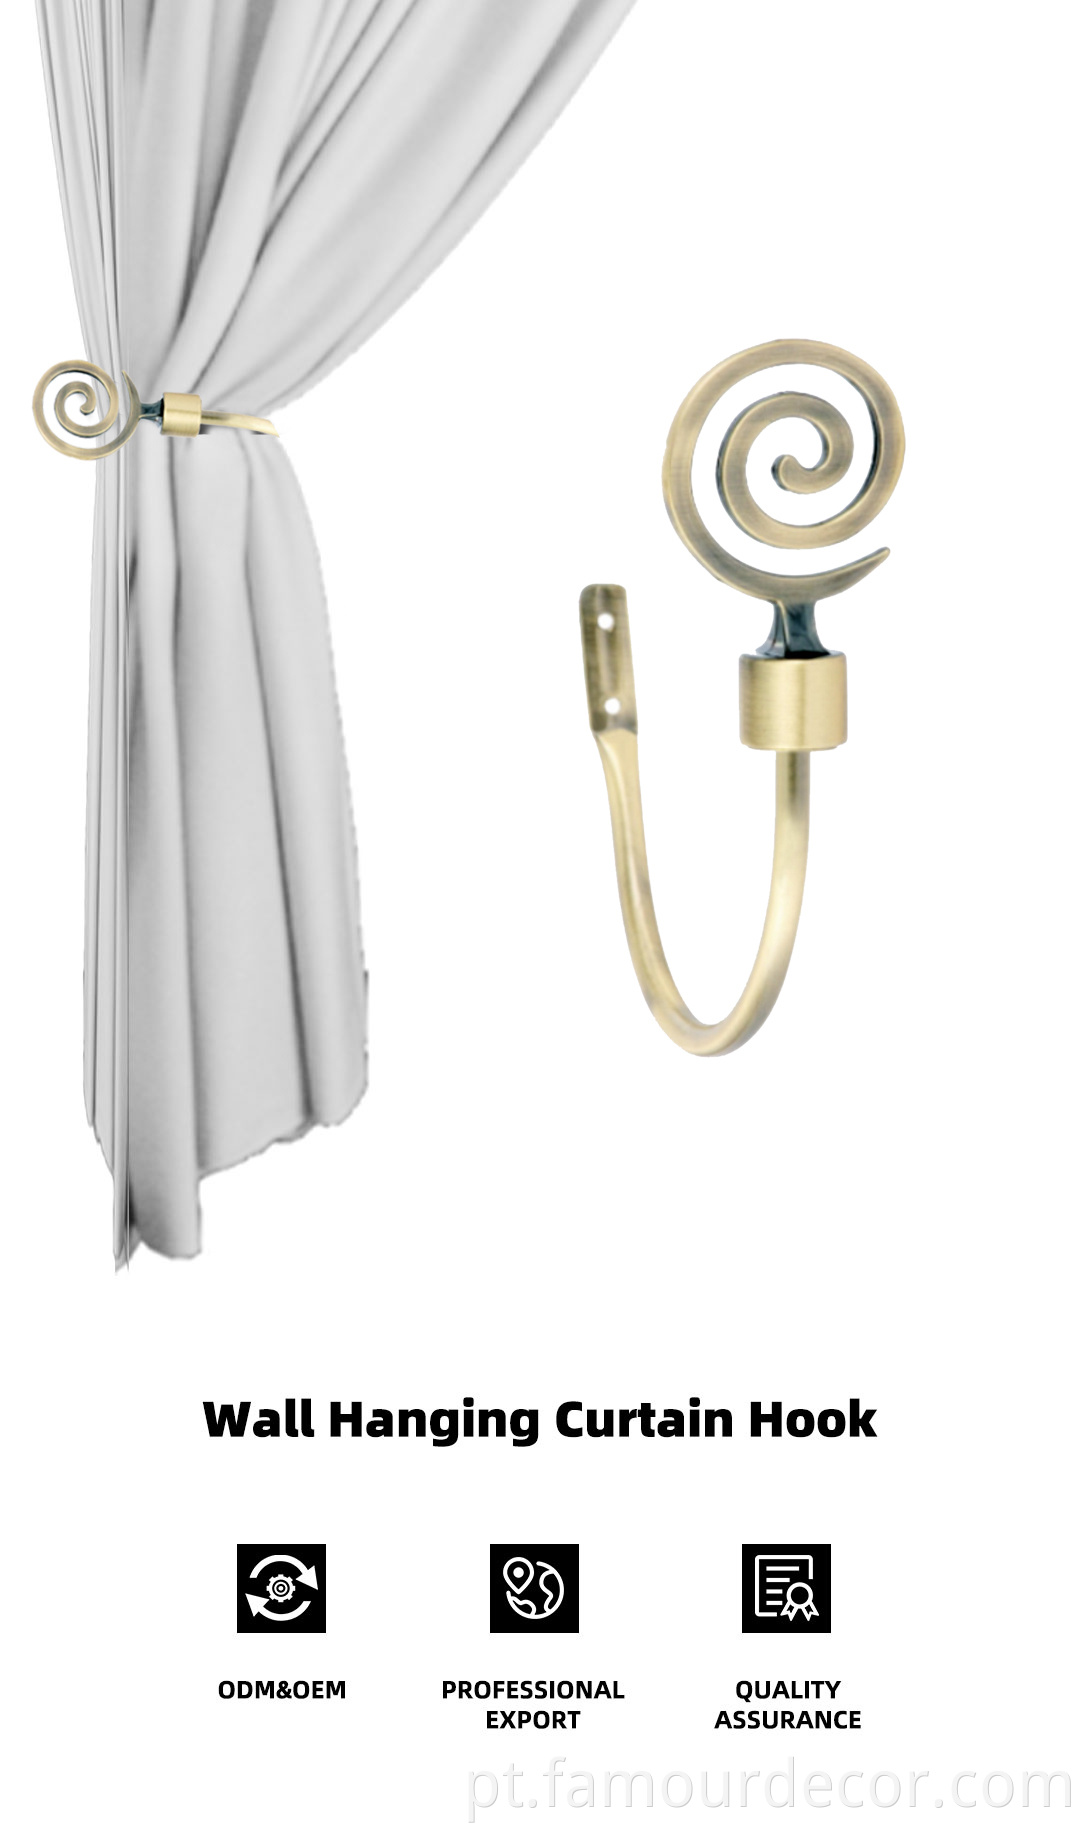 Direct sale antique style curtain tie back hook